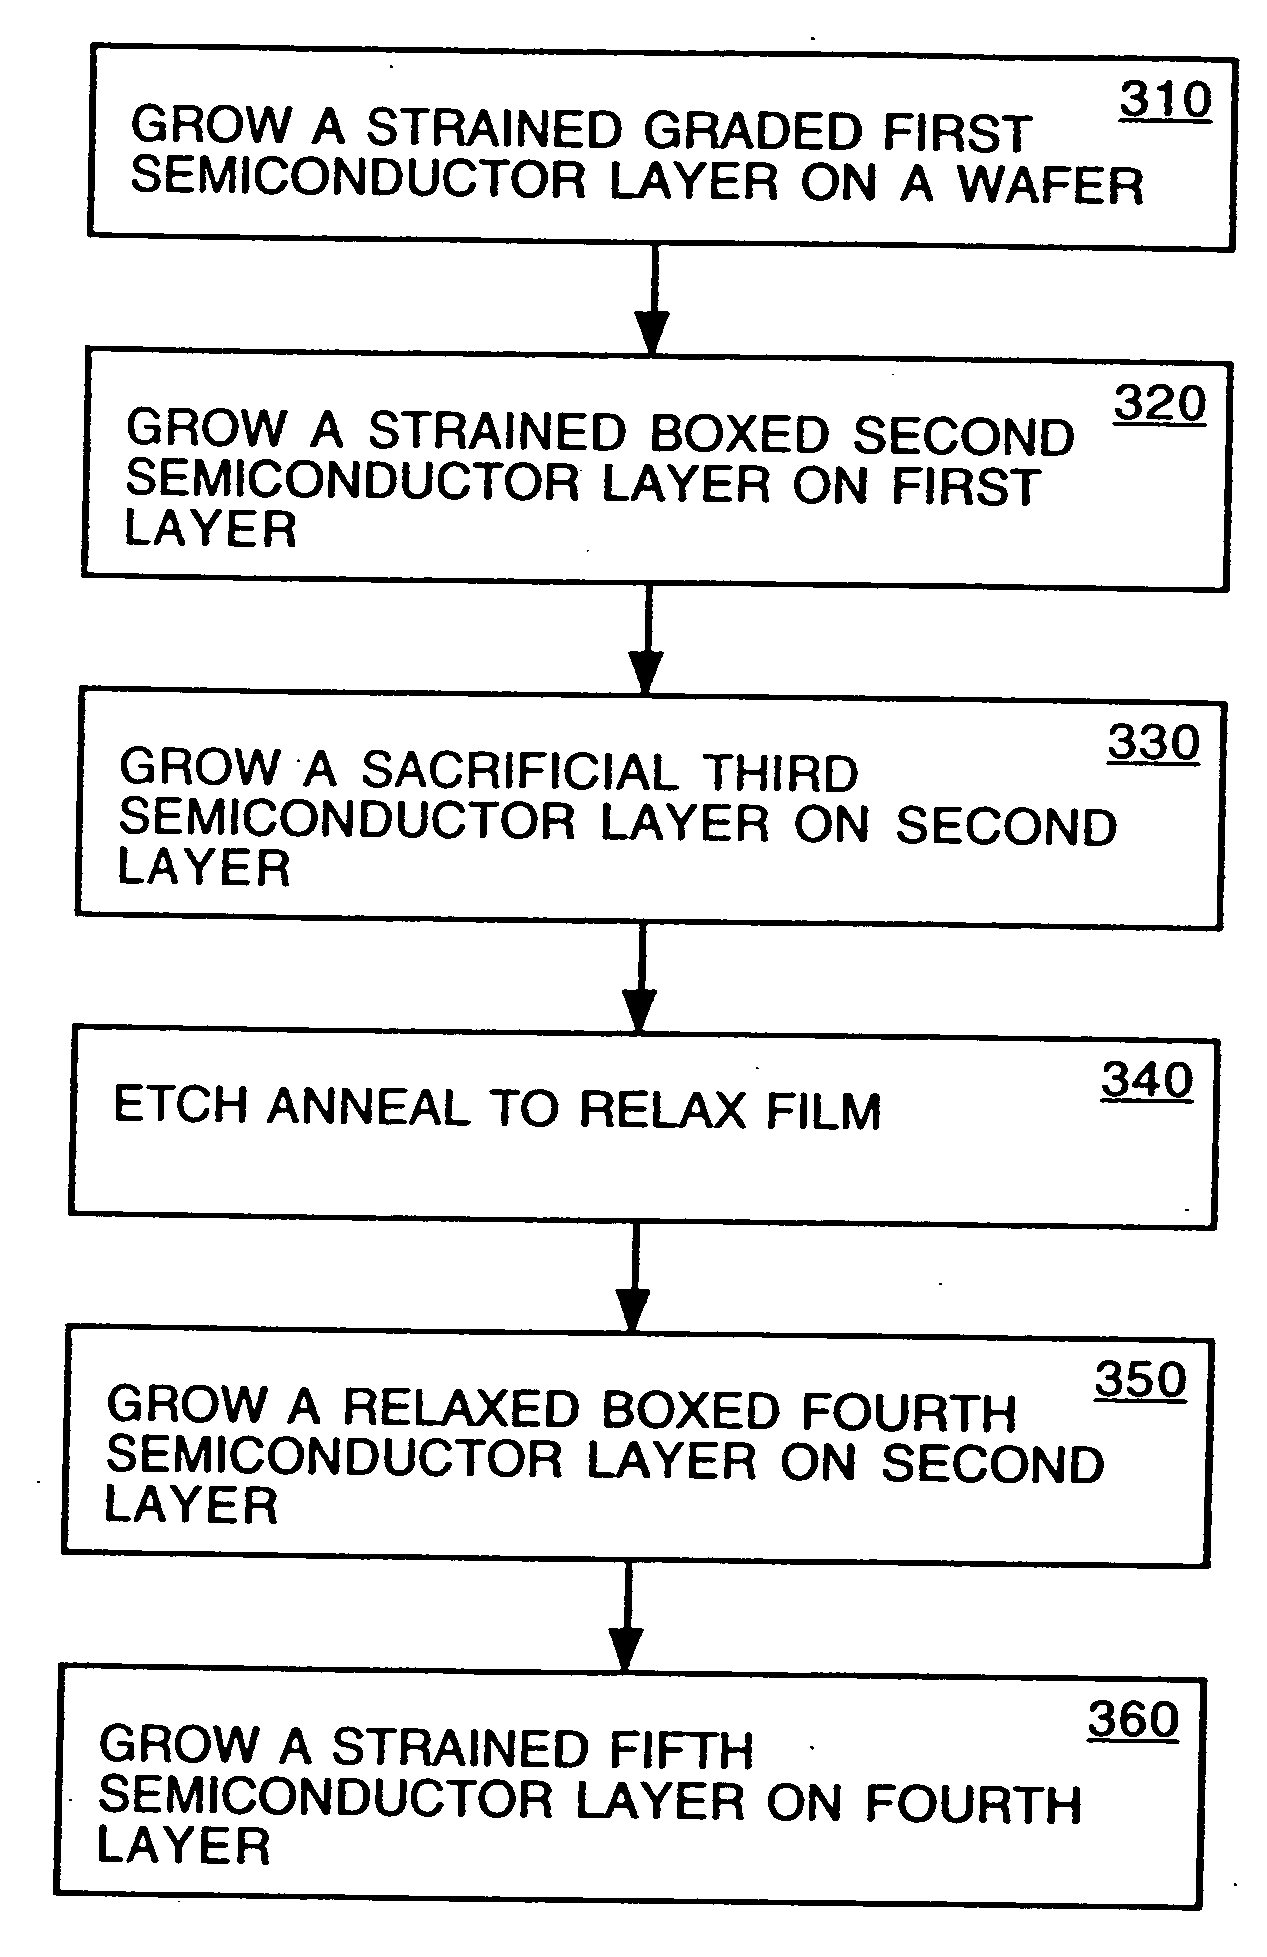 Non-contact etch annealing of strained layers